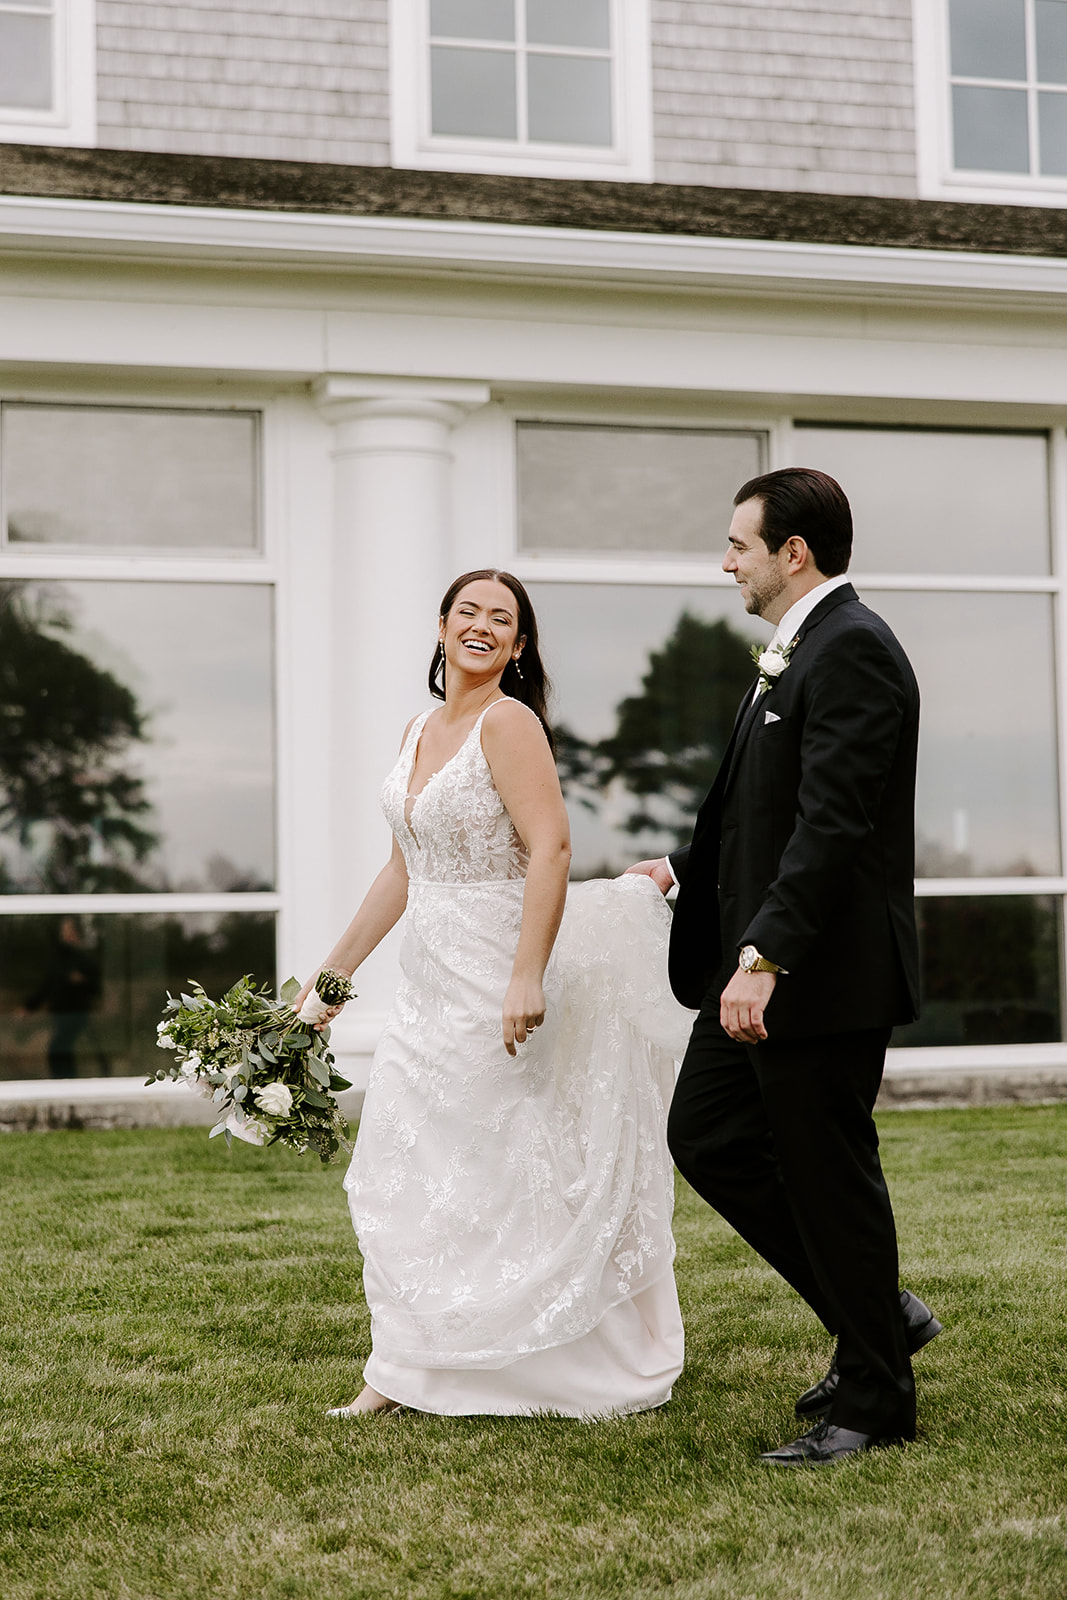 Beautiful bride and groom pose together after their stunning New England wedding day!